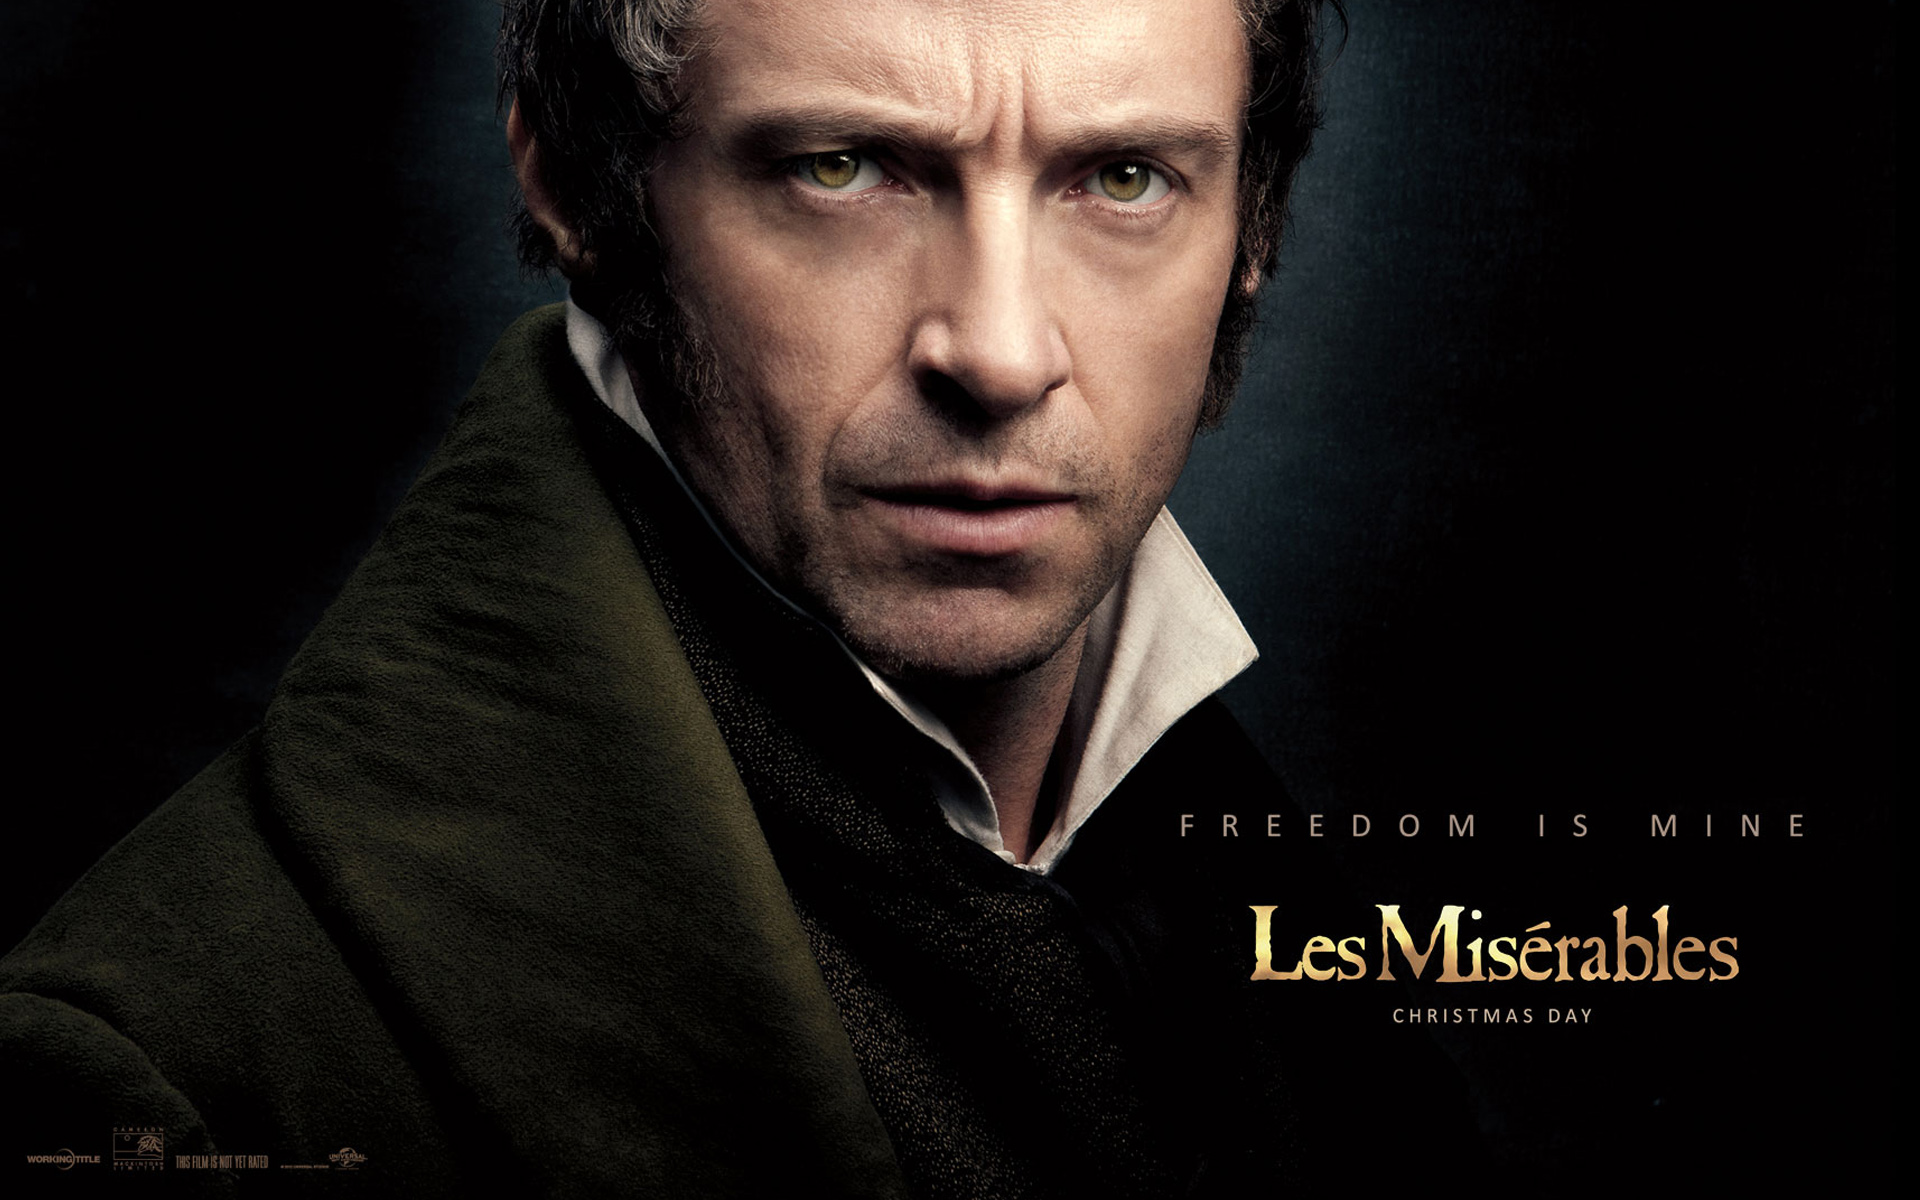 les miserables wallpaper,movie,poster,action film,darkness,fictional character